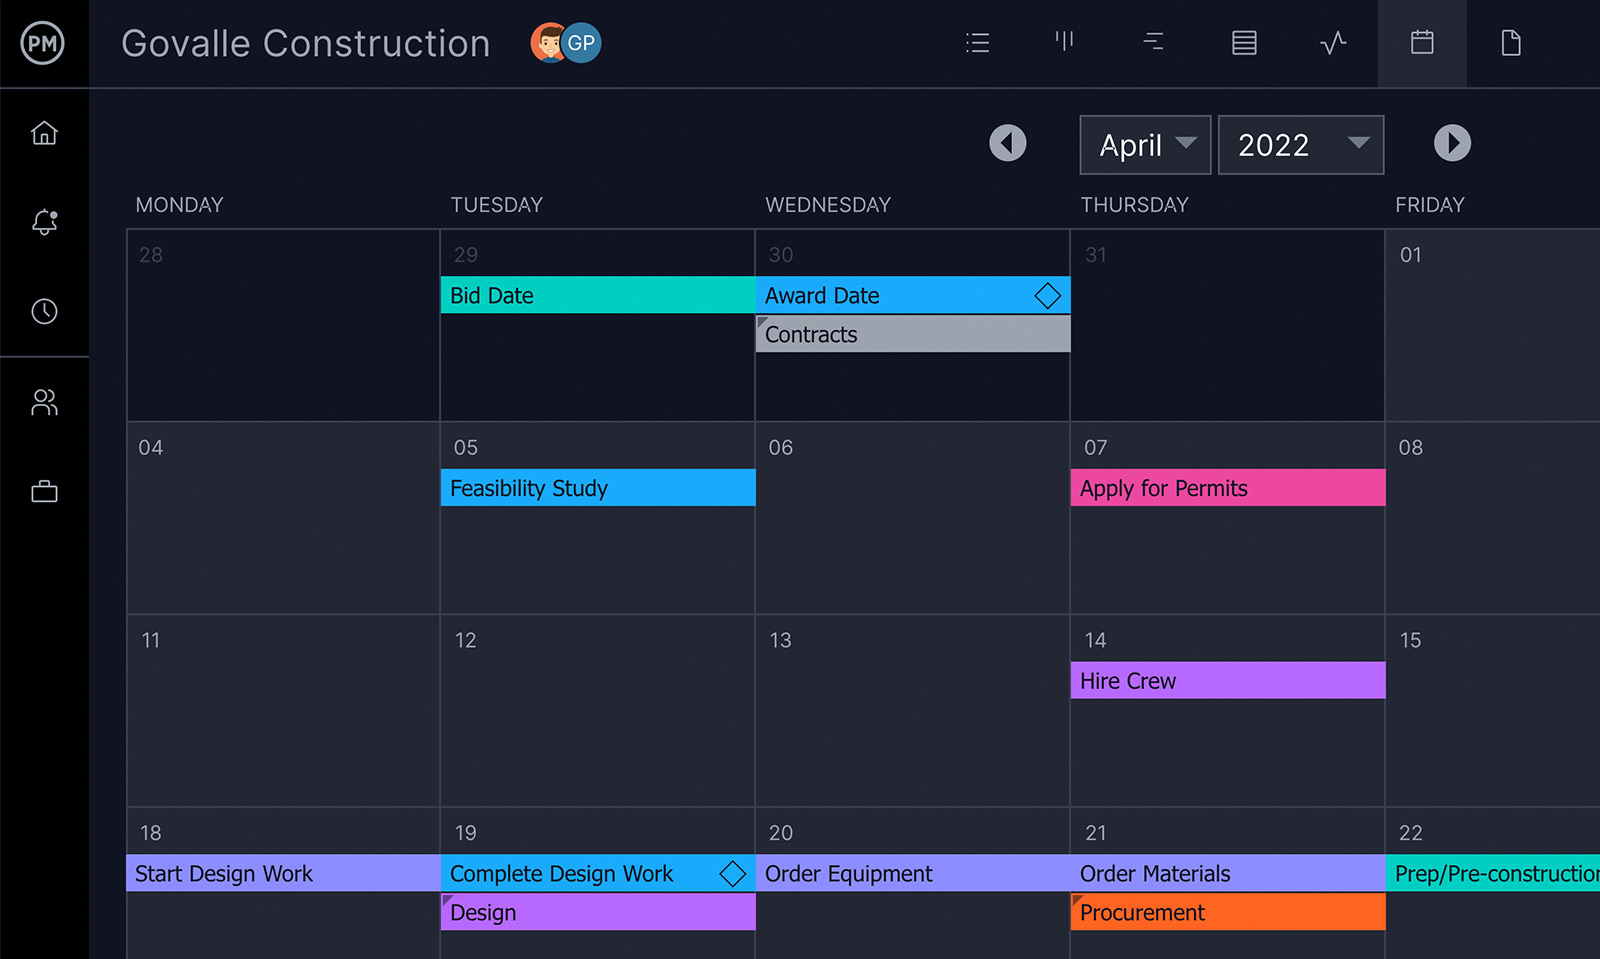 ProjectManager's calendar view helps you track your creative projects